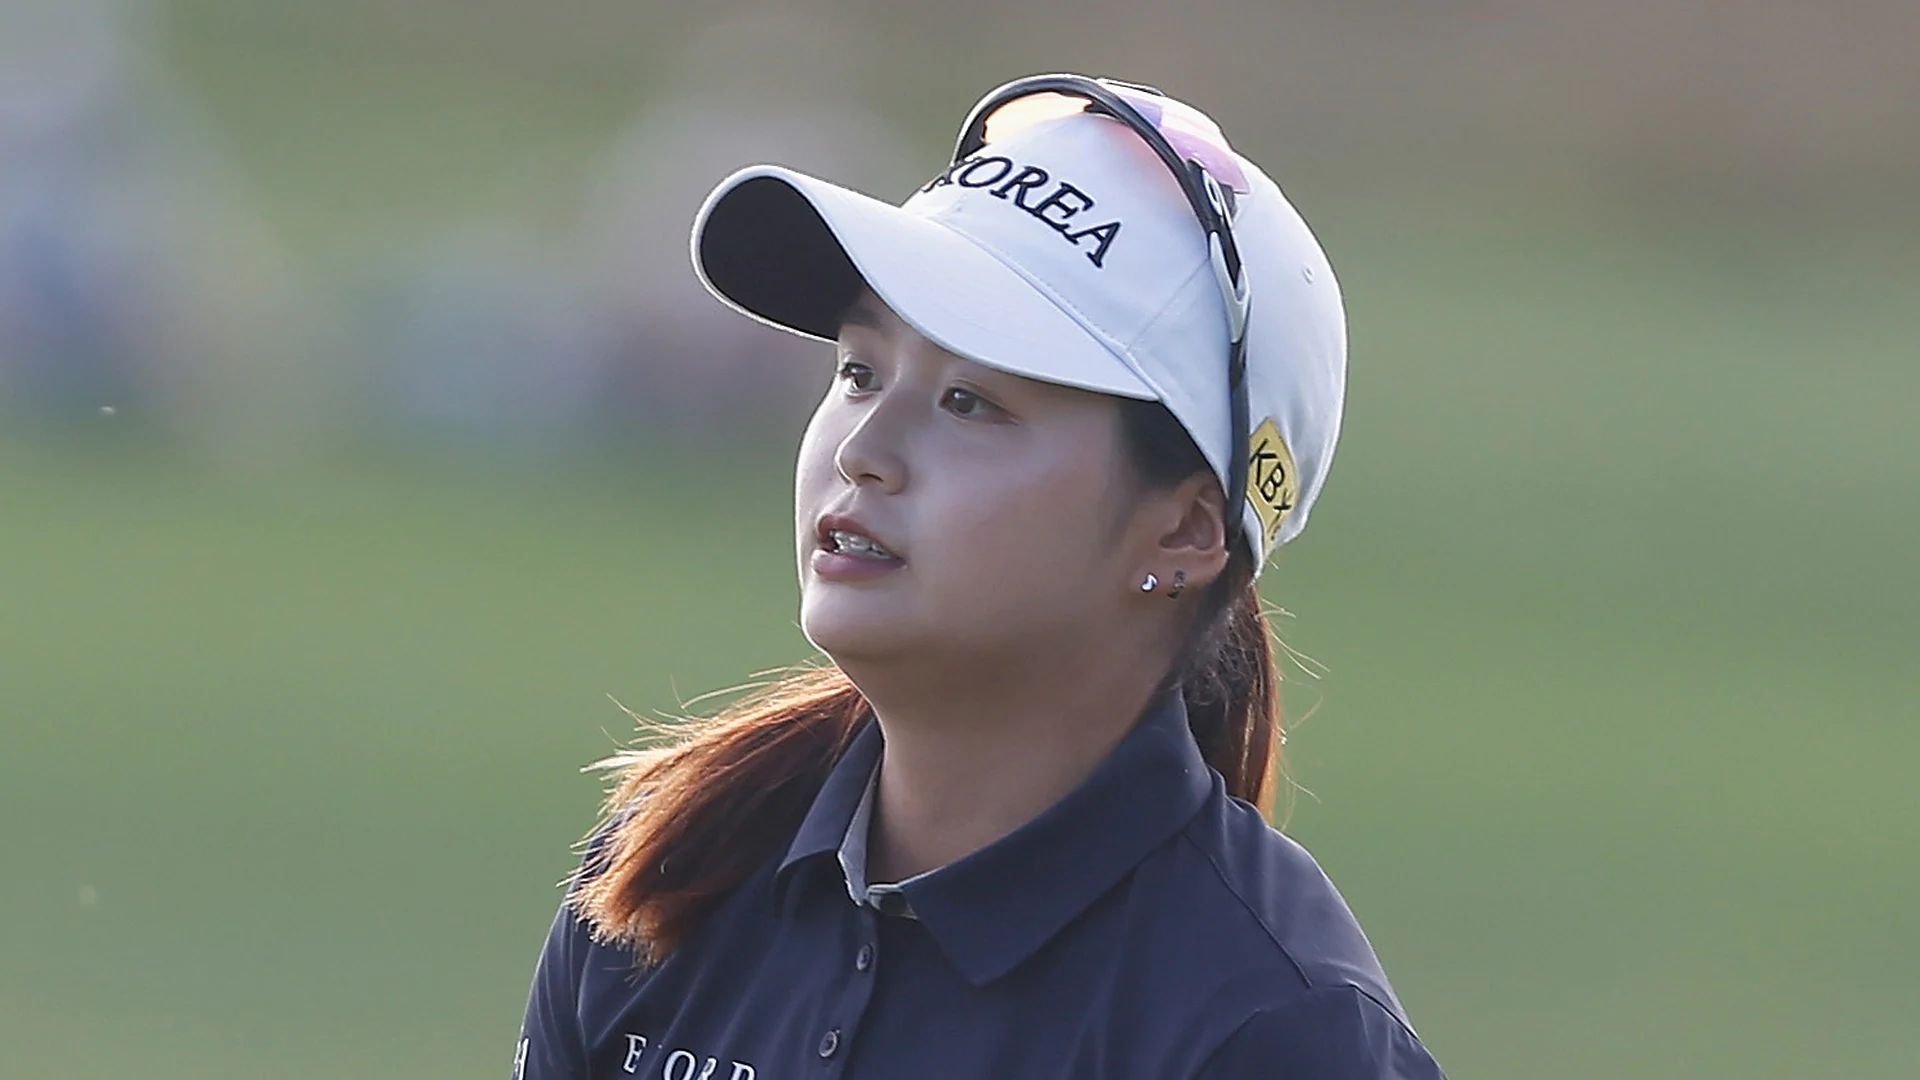 Choi could be second amateur to win Women's Open